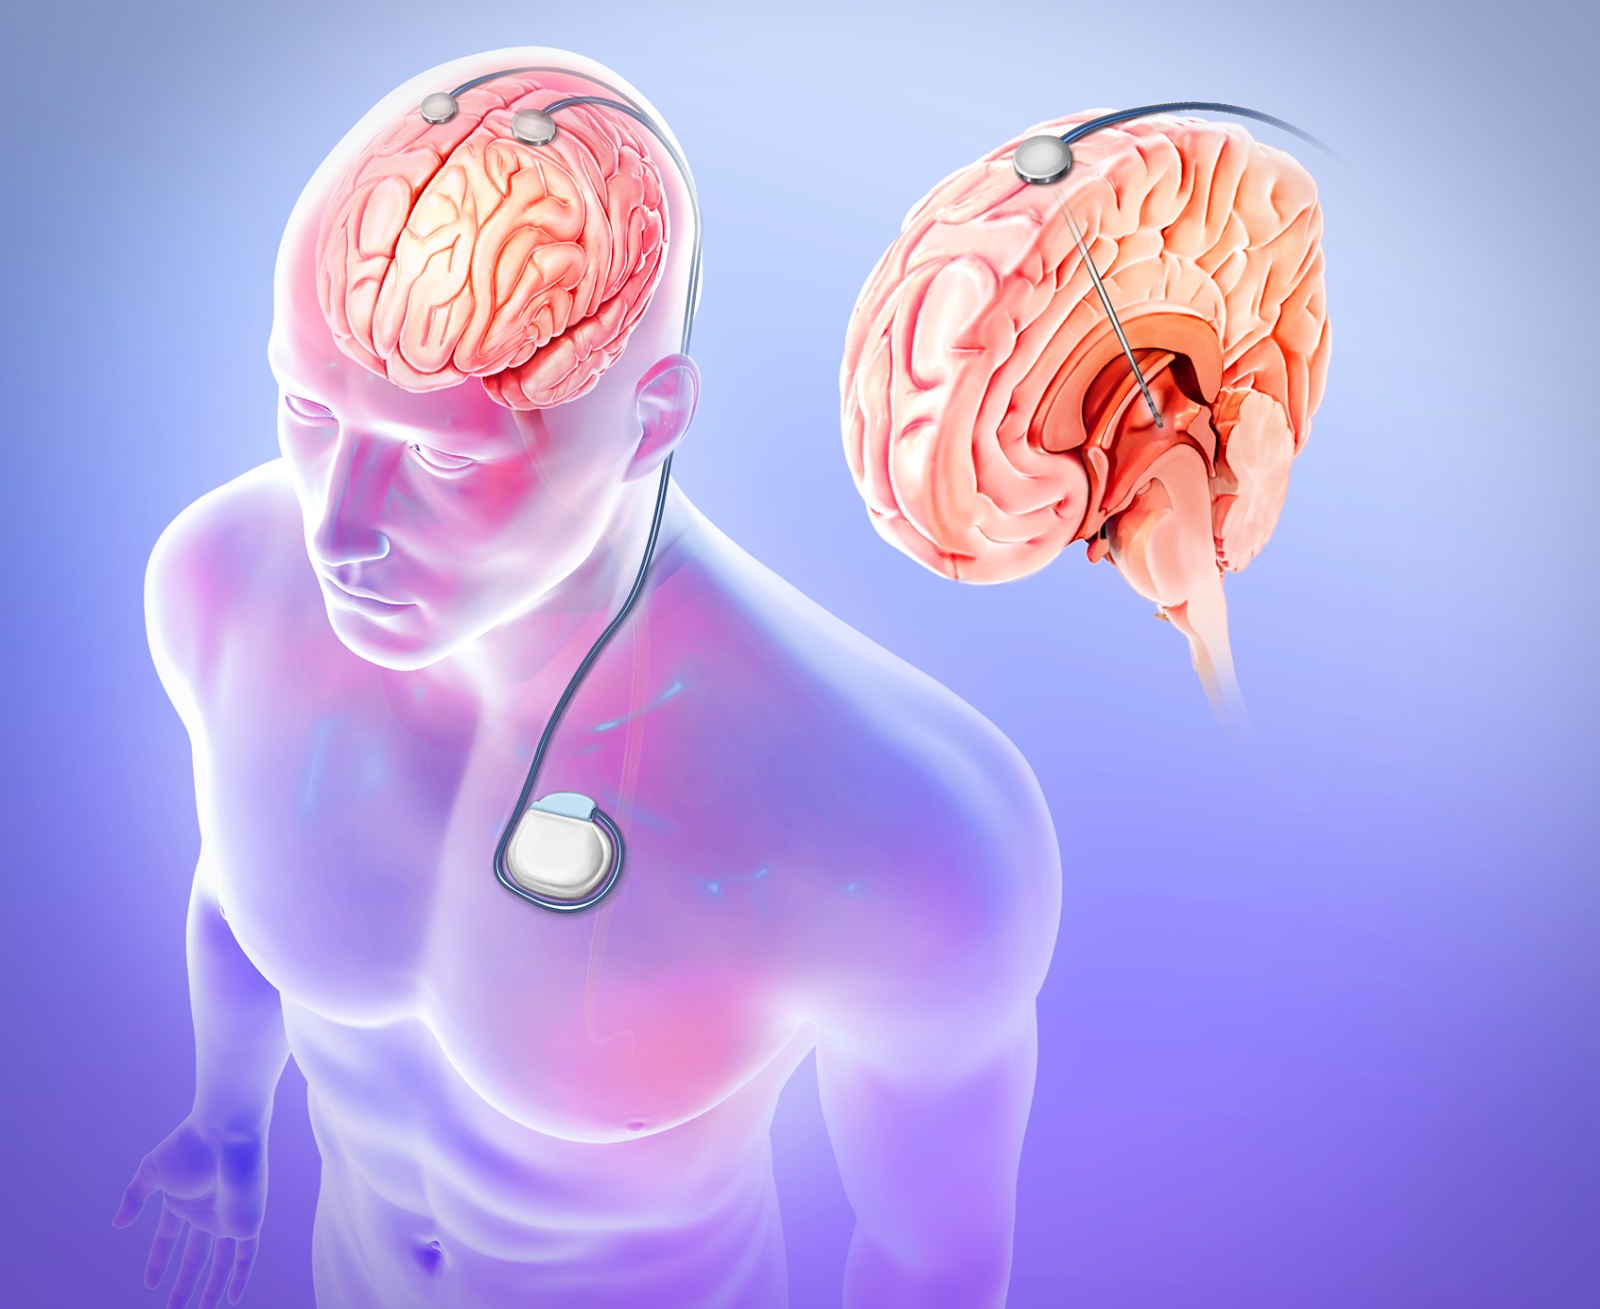 Global Epilepsy Surgery Market Trends on the Basis of Types, End-Users, and Region Segmentation